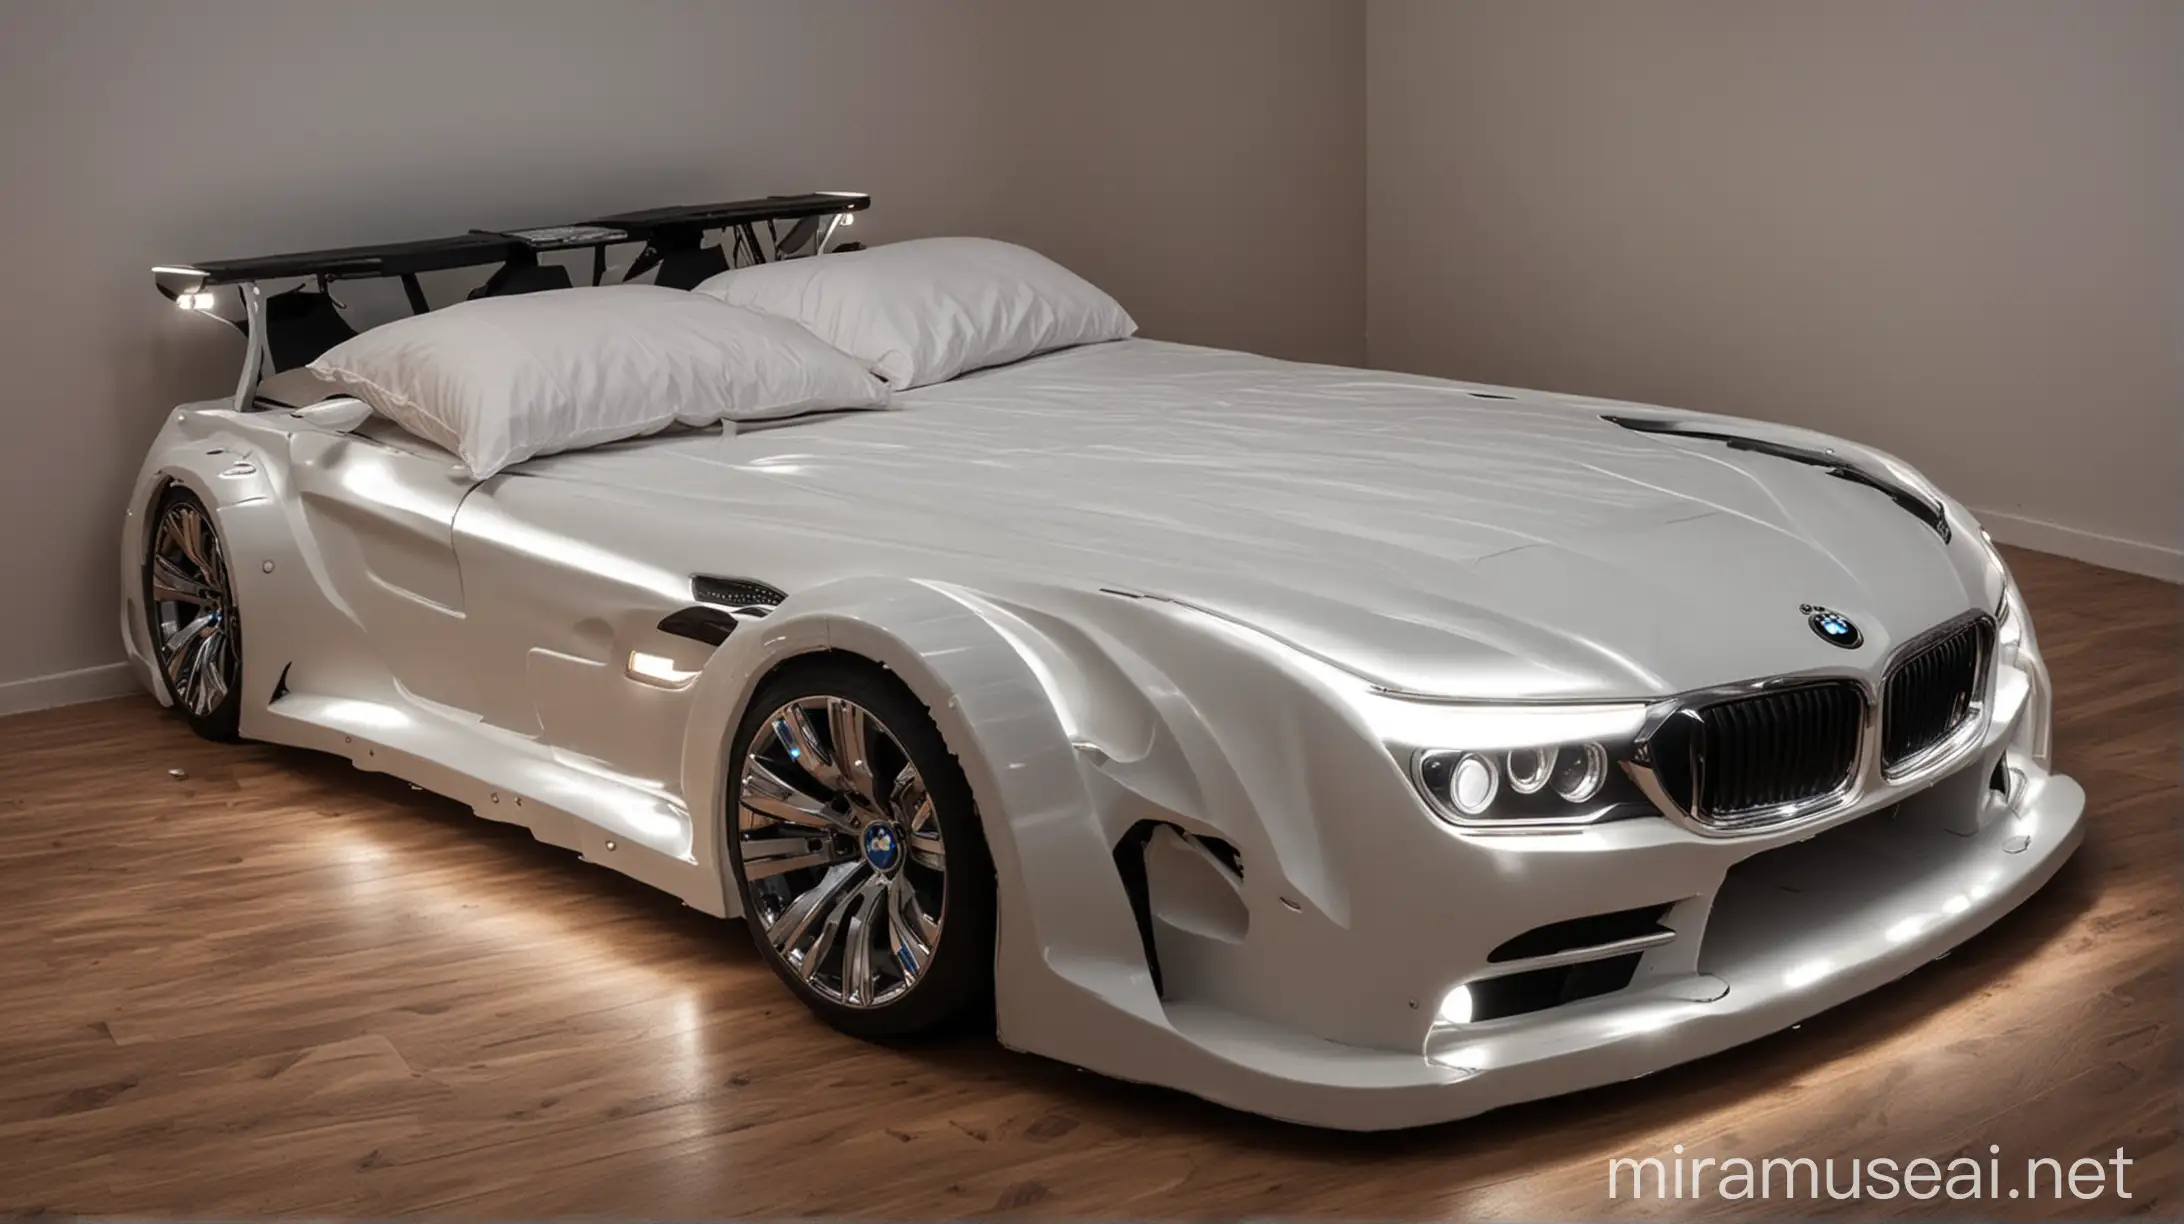 Double bed in the shape of a BMW car with headlights and tuning lights on